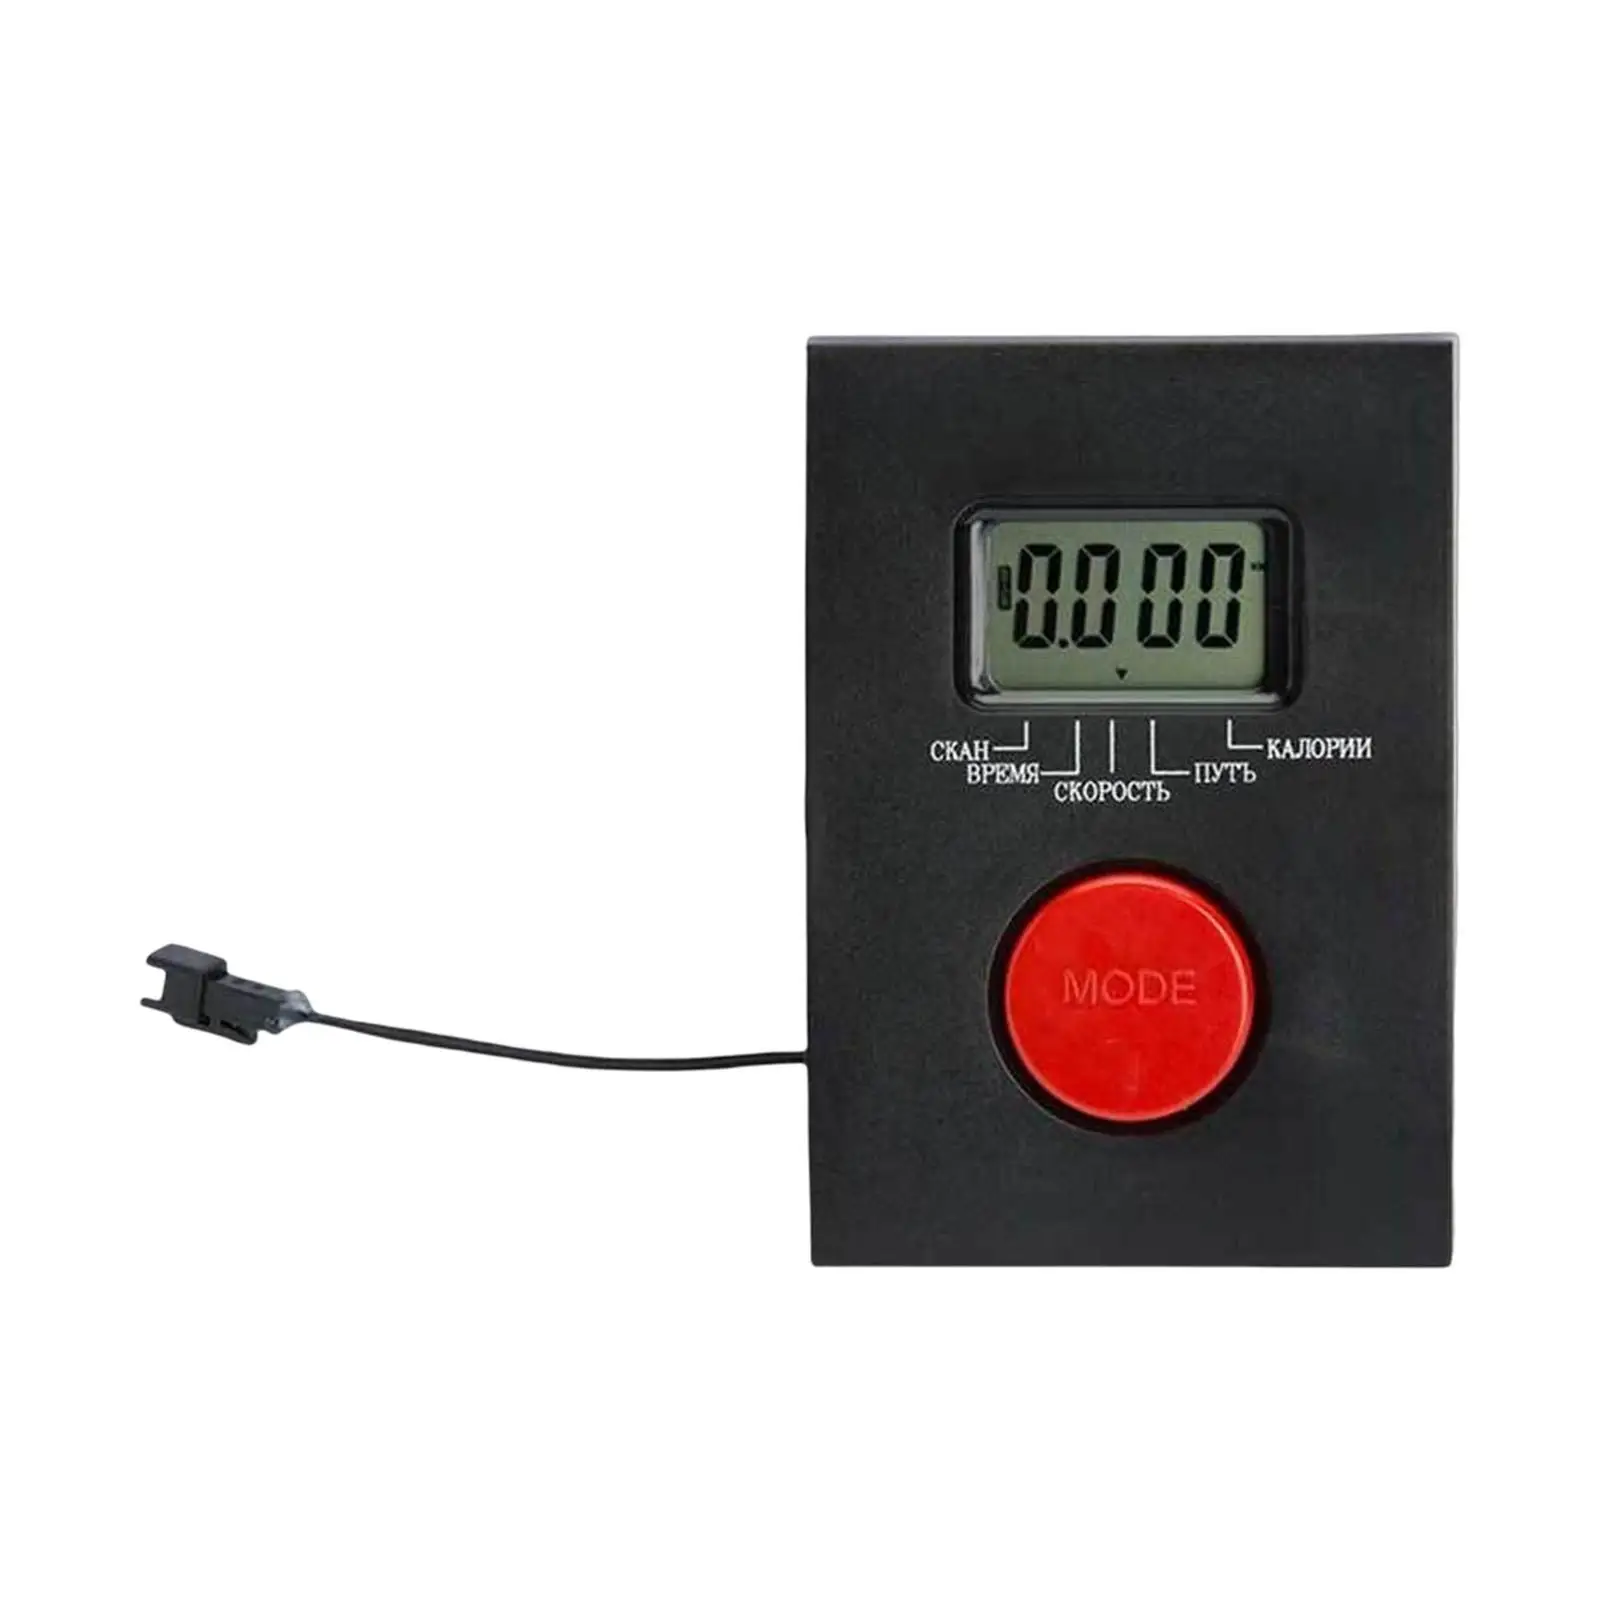 Multifunction Monitor speedometers for Stationary Bikes Measurement Sturdy for